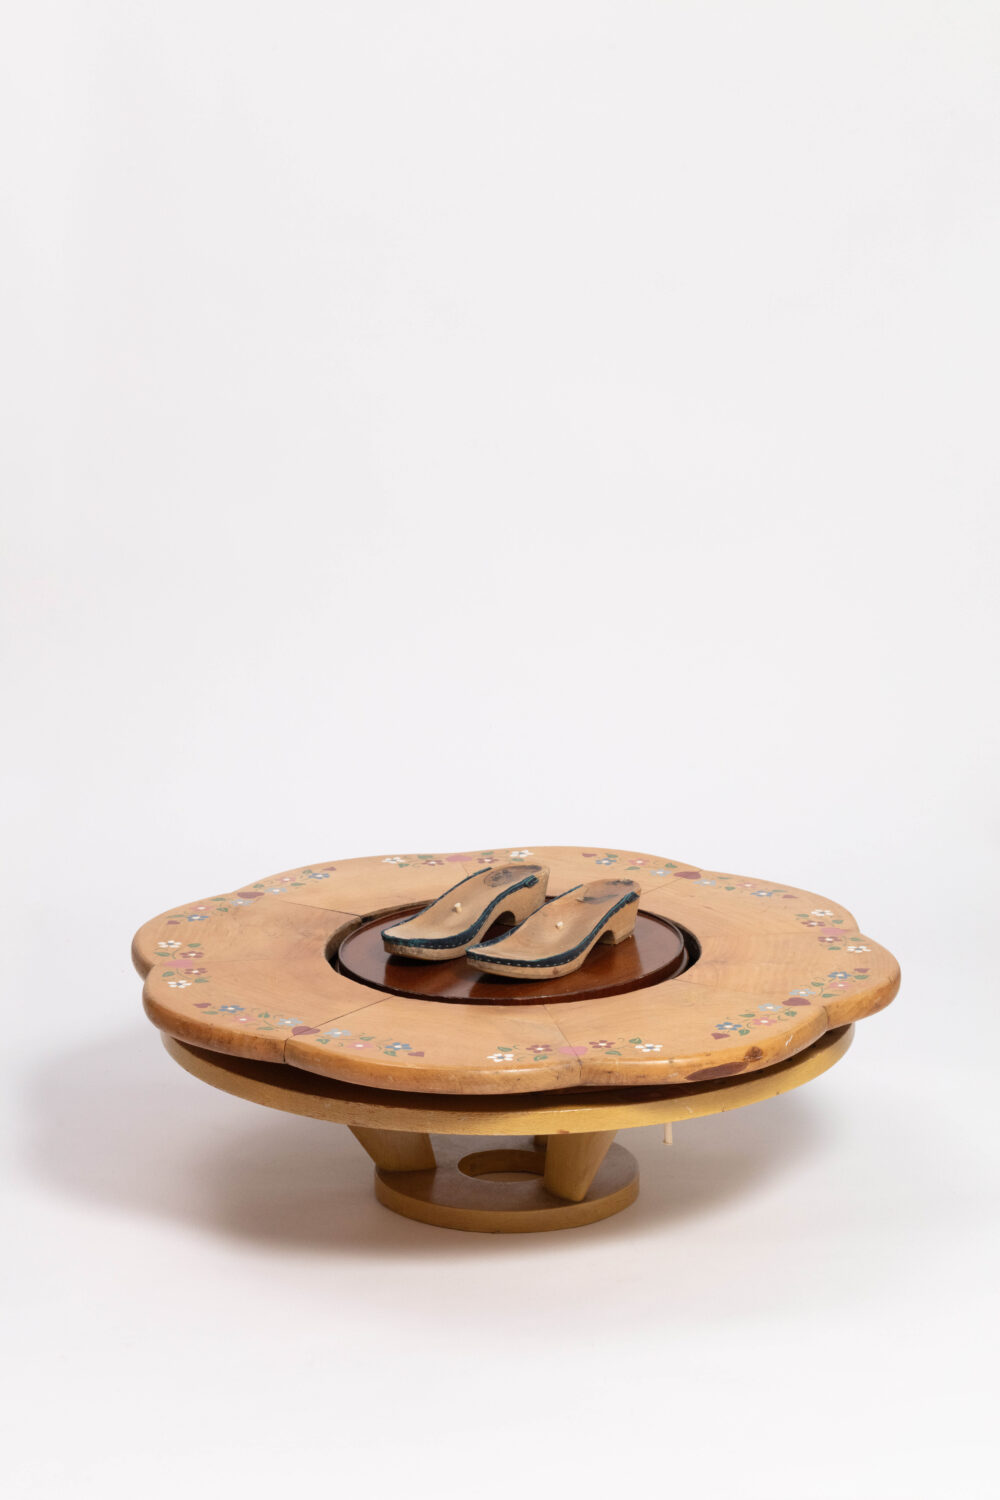 A wooden platform with the wooden soles of a pair of clogs on top.